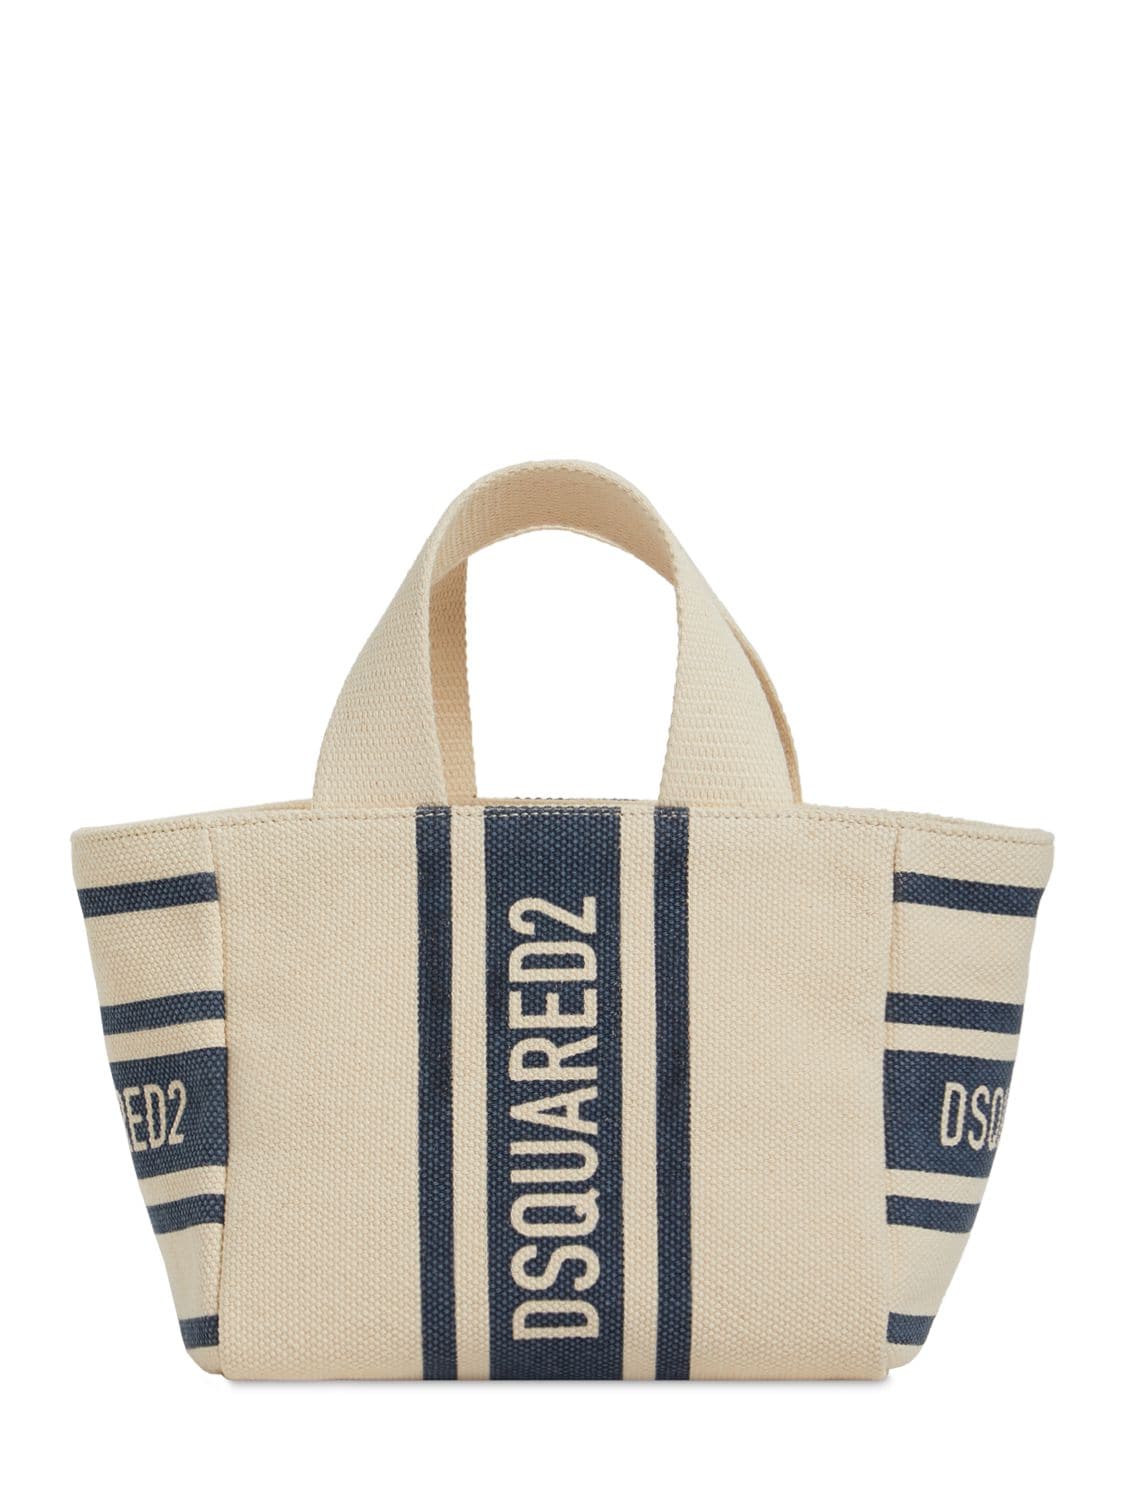 Dsquared2 - Dsquared2 canvas top handle bag - Ivory/Blue | Luisaviaroma